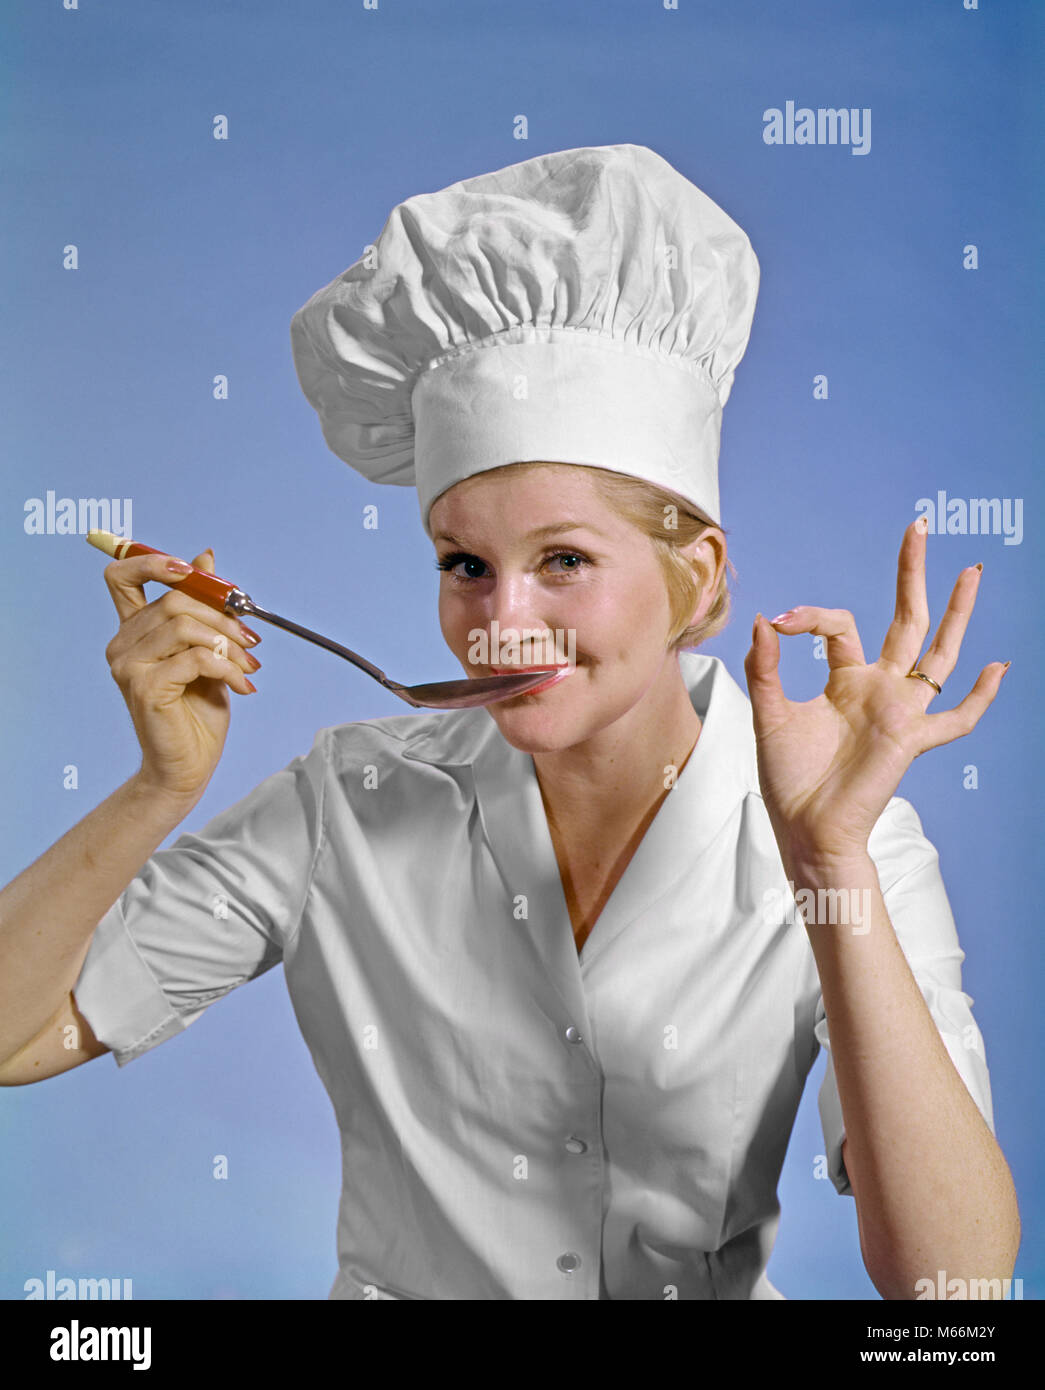 1960S WOMAN CHEF WEARING TOQUE LOOKING AT CAMERA TASTING FOOD MAKING OKAY SIGN SMILING - kf5637 HAR001 HARS GOOD OLD FASHION 1 STYLE COMMUNICATION CAREER BLOND SIGNAL INFORMATION CAUCASIAN TESTING LIFESTYLE SATISFACTION FEMALES JOBS STUDIO SHOT ONE PERSON ONLY COMMUNICATING COPY SPACE HALF-LENGTH LADIES OK INDOORS PROFESSION NOSTALGIA EYE CONTACT 25-30 YEARS 30-35 YEARS GOALS HOMEMAKER SINGLE OBJECT SKILL OCCUPATION HAPPINESS SKILLS HOMEMAKERS NOURISH CAREERS LEADERSHIP OKAY WORKFORCE TASTE TASTING AUTHORITY GESTURES SIGNALS SMILES APPROVAL COMMUNICATE COOKS NOURISHMENT O.K. MID-ADULT Stock Photo